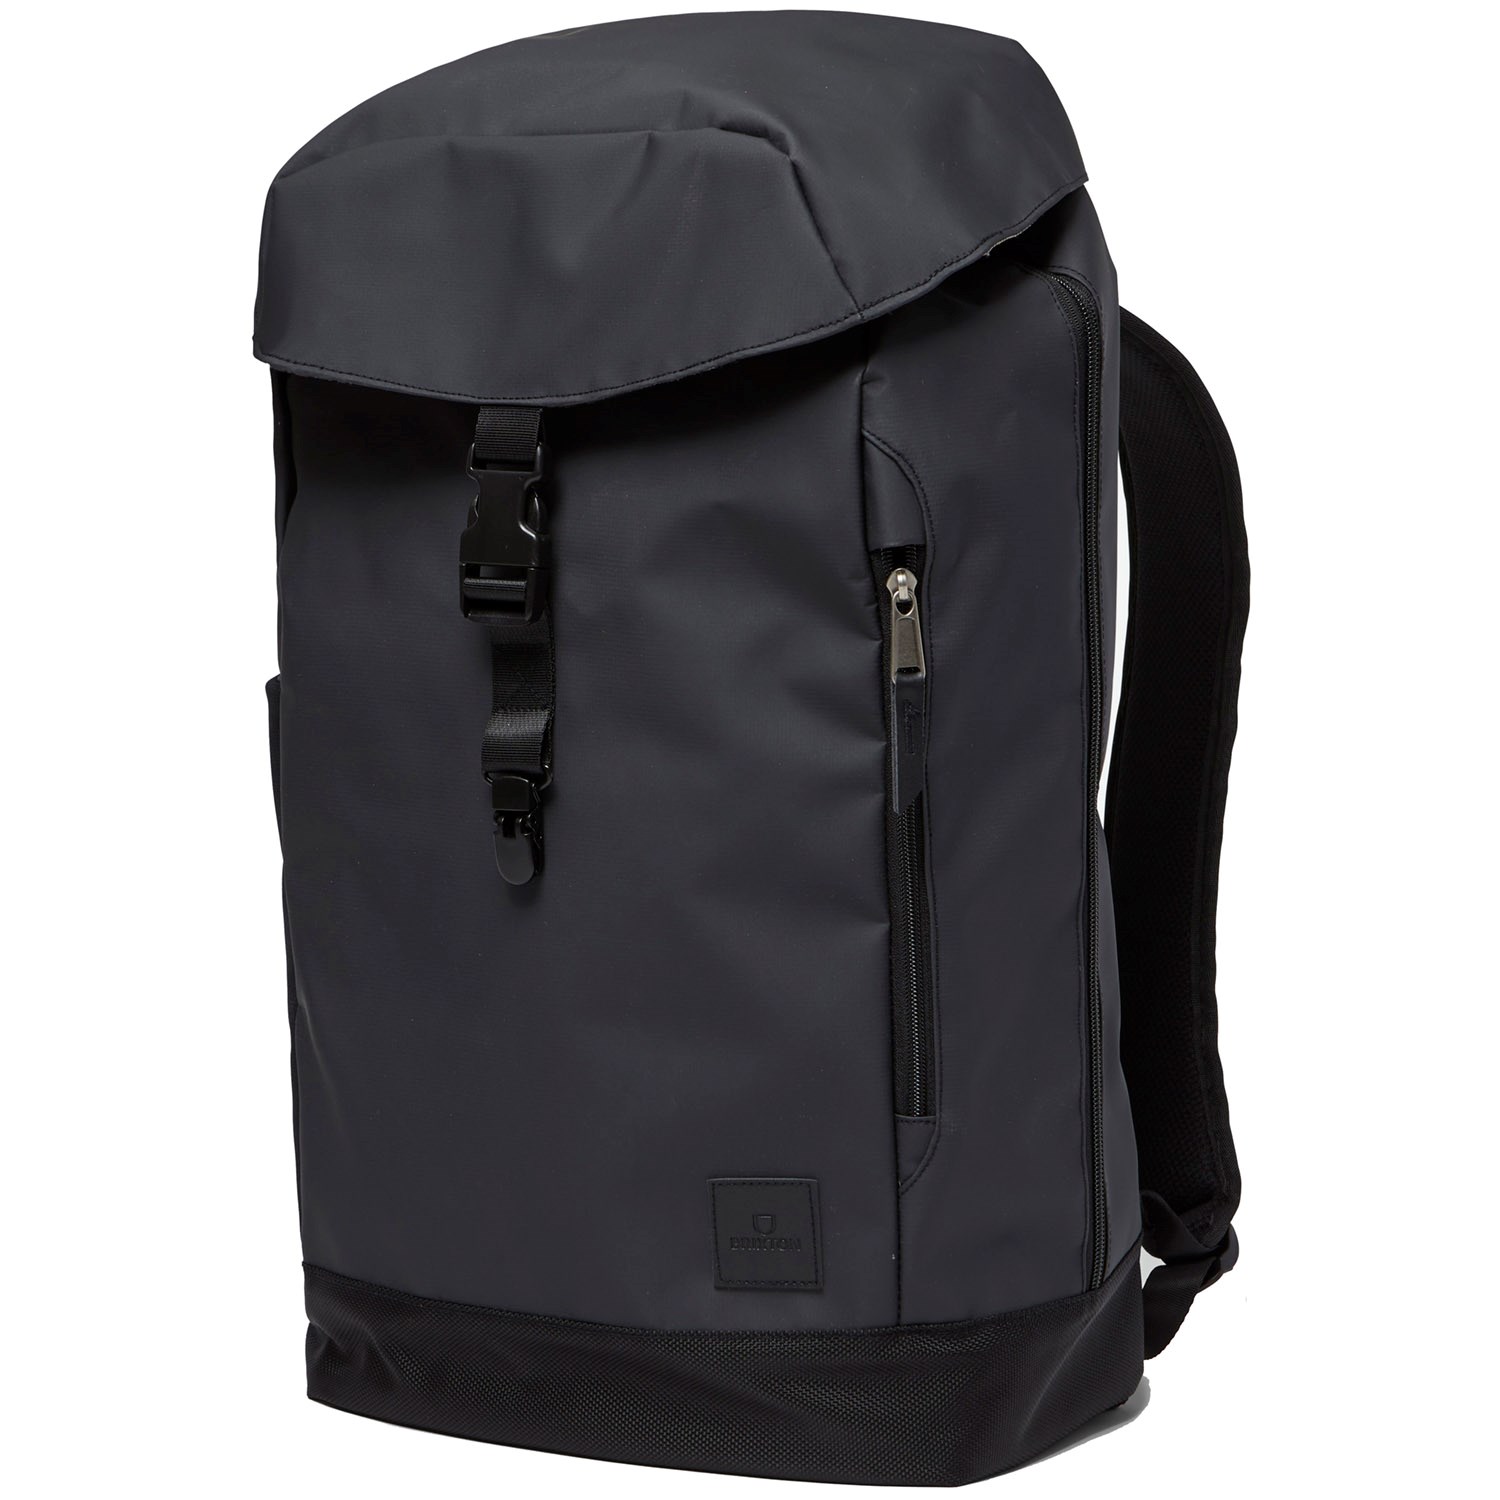 Brixton Commuter Backpack